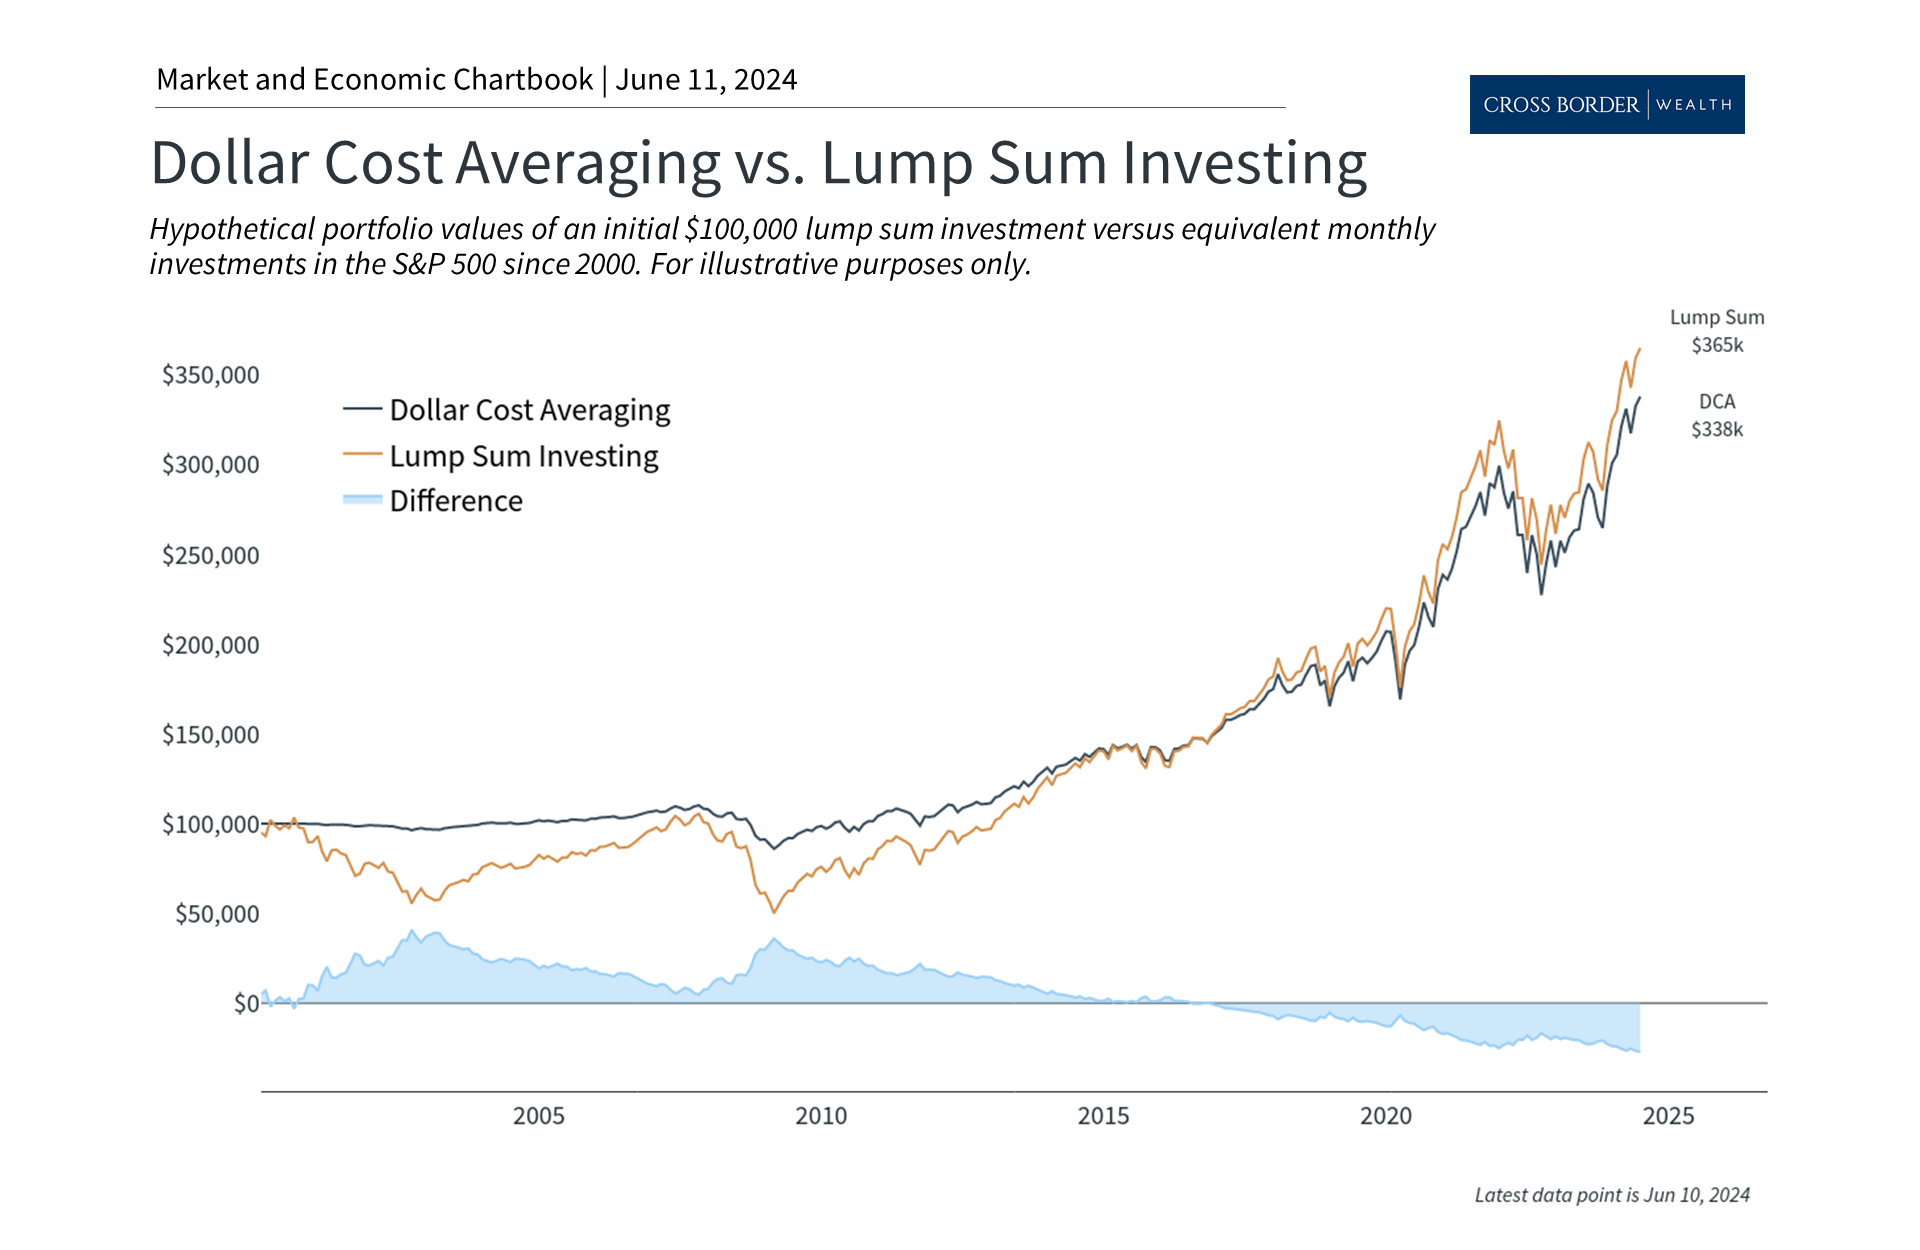 How Dollar-Cost Averaging Can Help Investors Get Into the Market